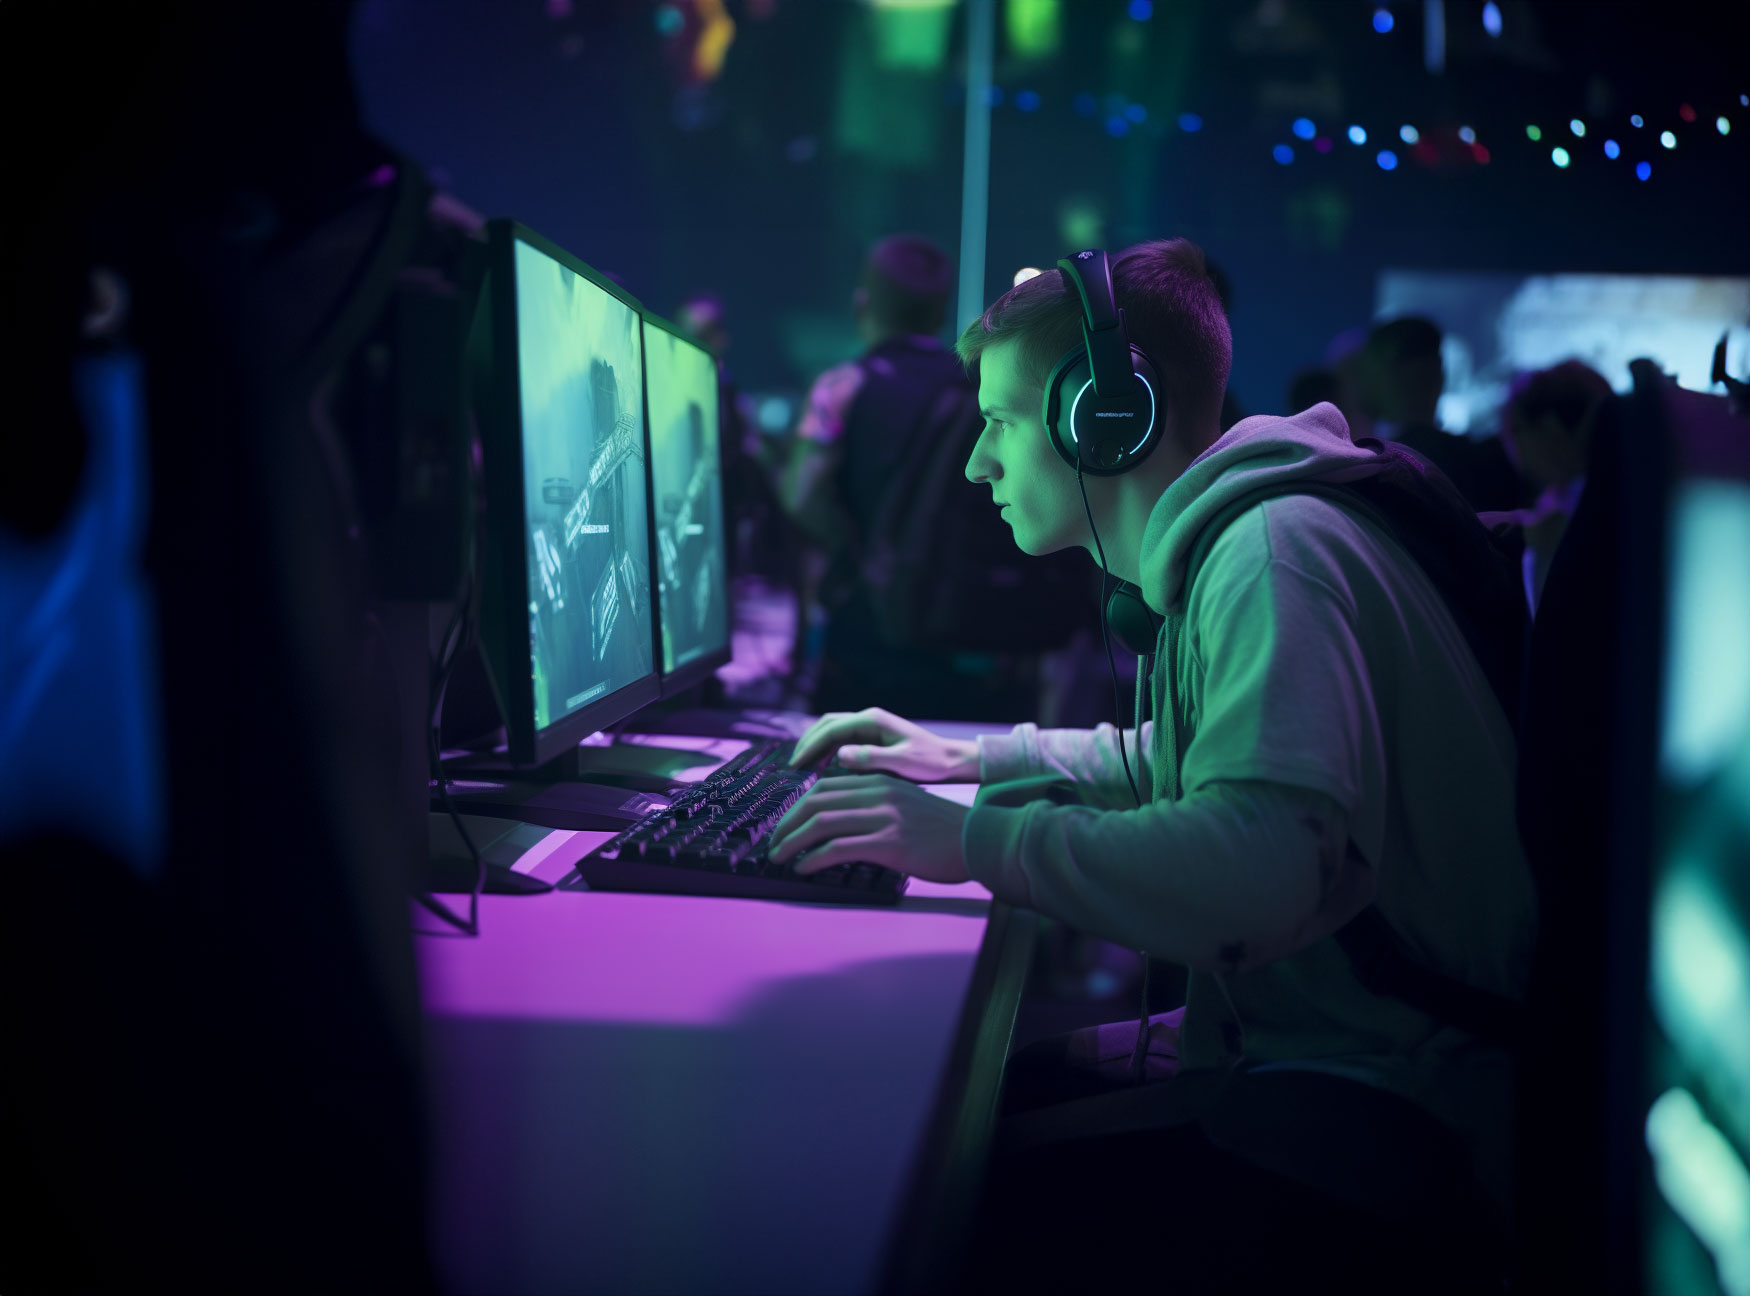 nevets2 gamer is on his computer screen at a gaming convention 45e2dd9b 19f8 470f bb58 50318c6f7525 groesser 01